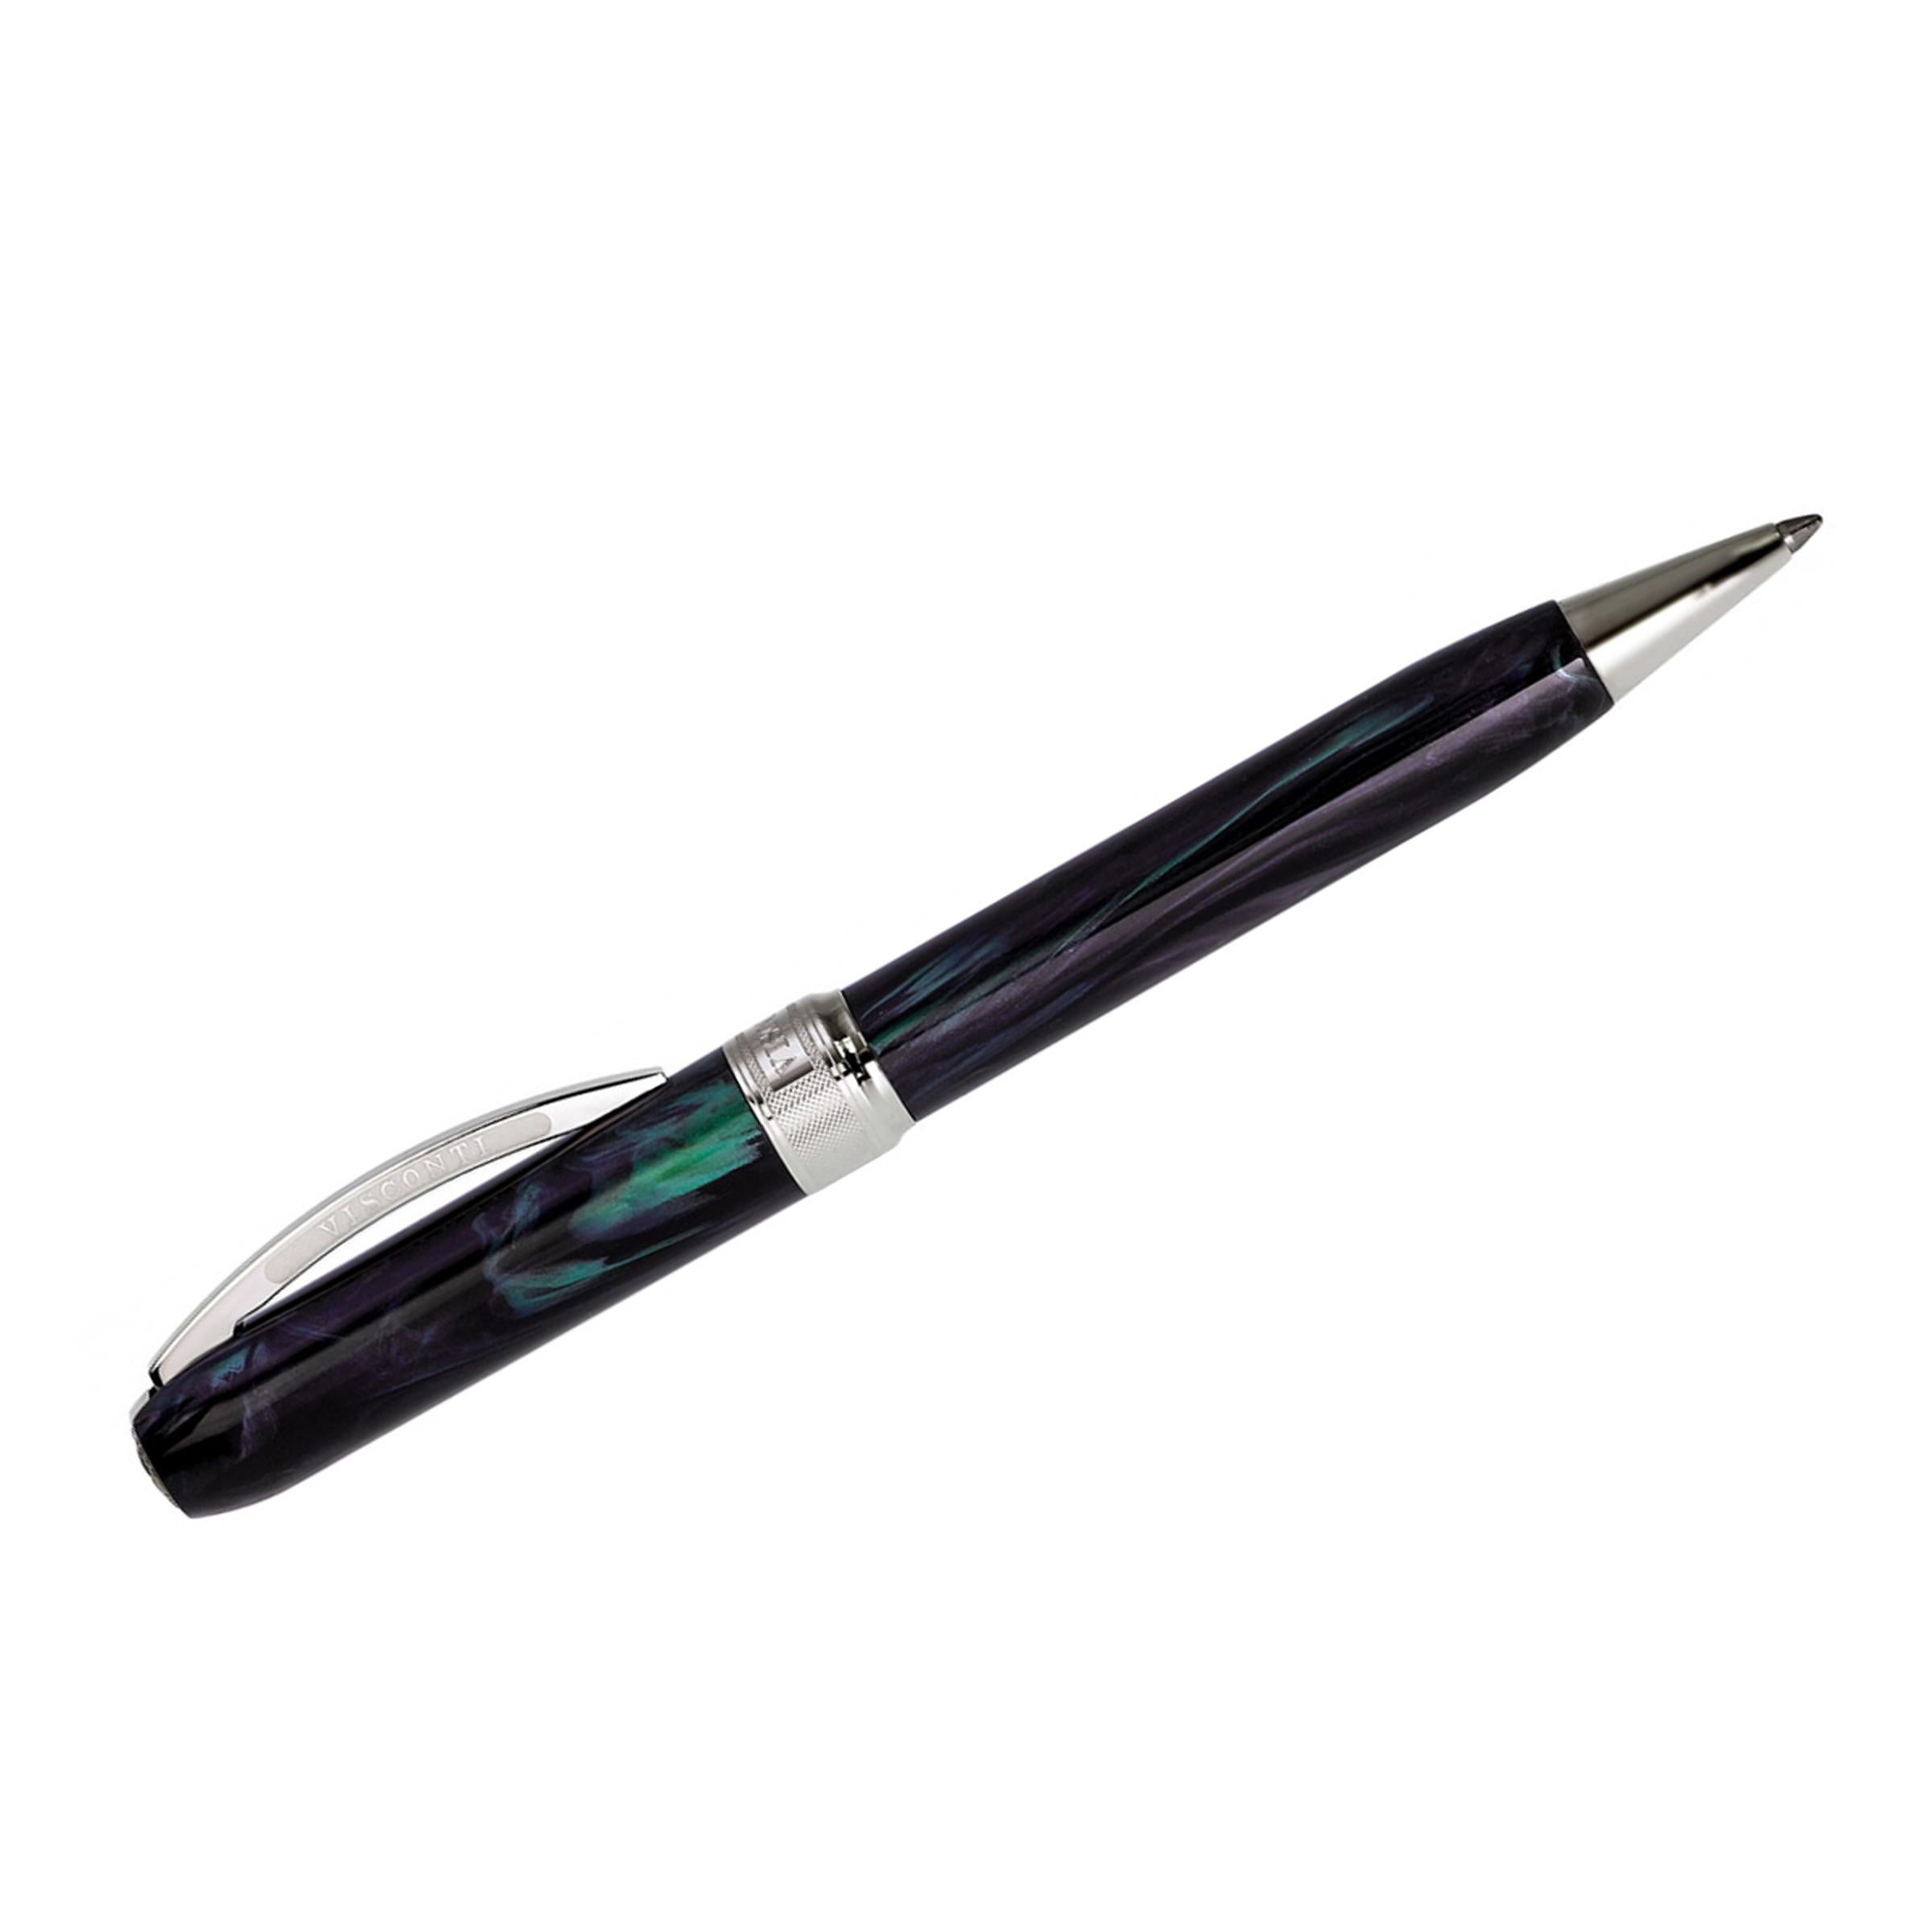 Made from variegated dark green resin and matched palladium-plated trim, this ballpoint pen exudes luxury and opulence without breaking the bank. Finished with an intricately engraved central band which features the Visconti name and the signature